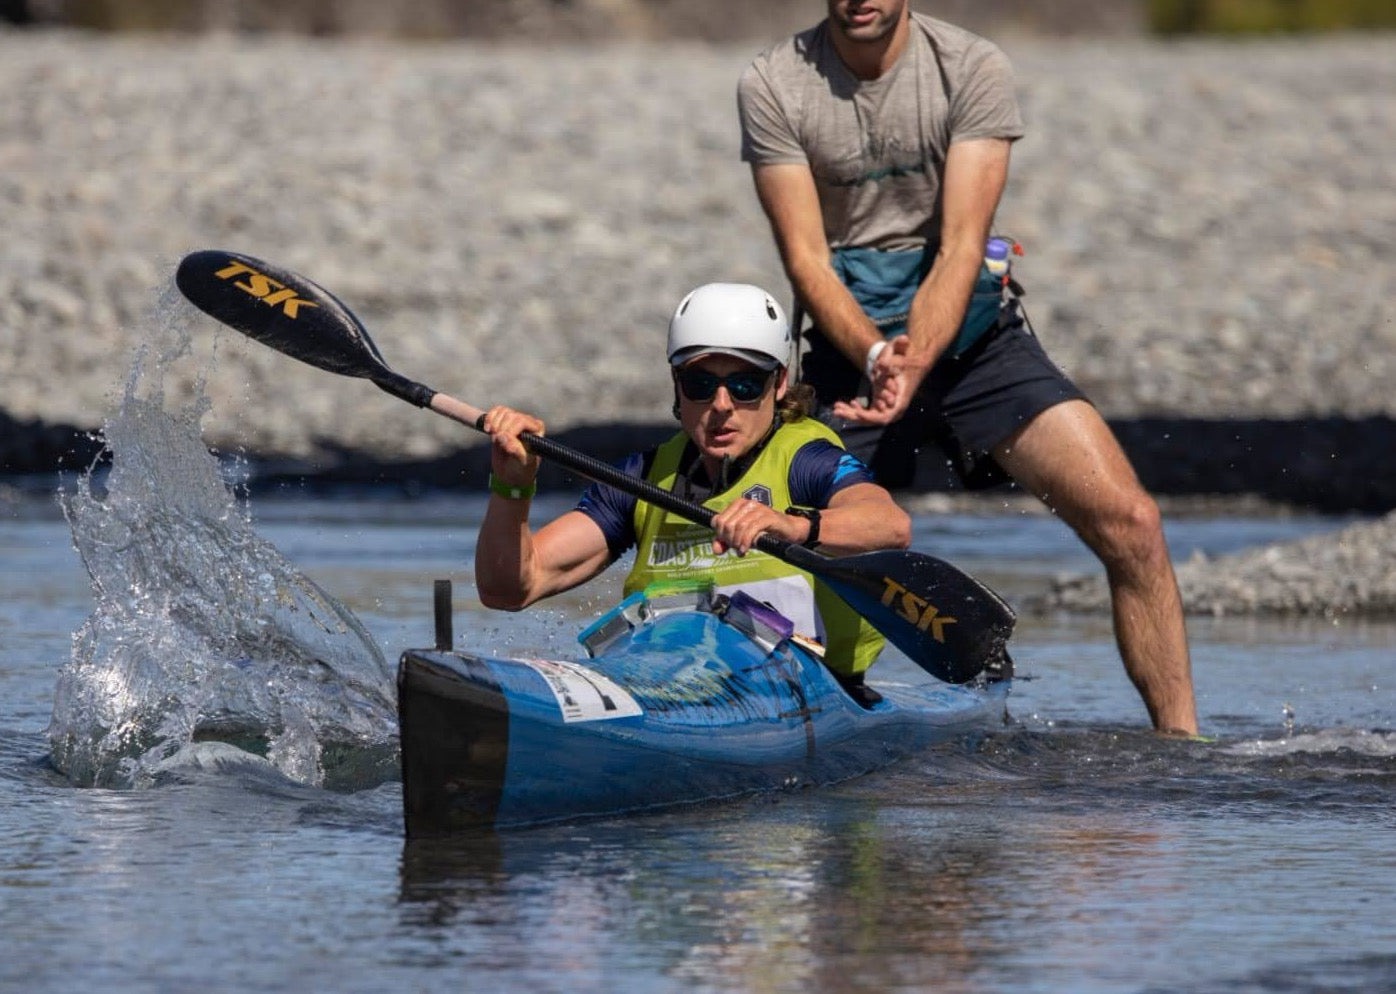 Kayaking Technique - Power and Efficiency